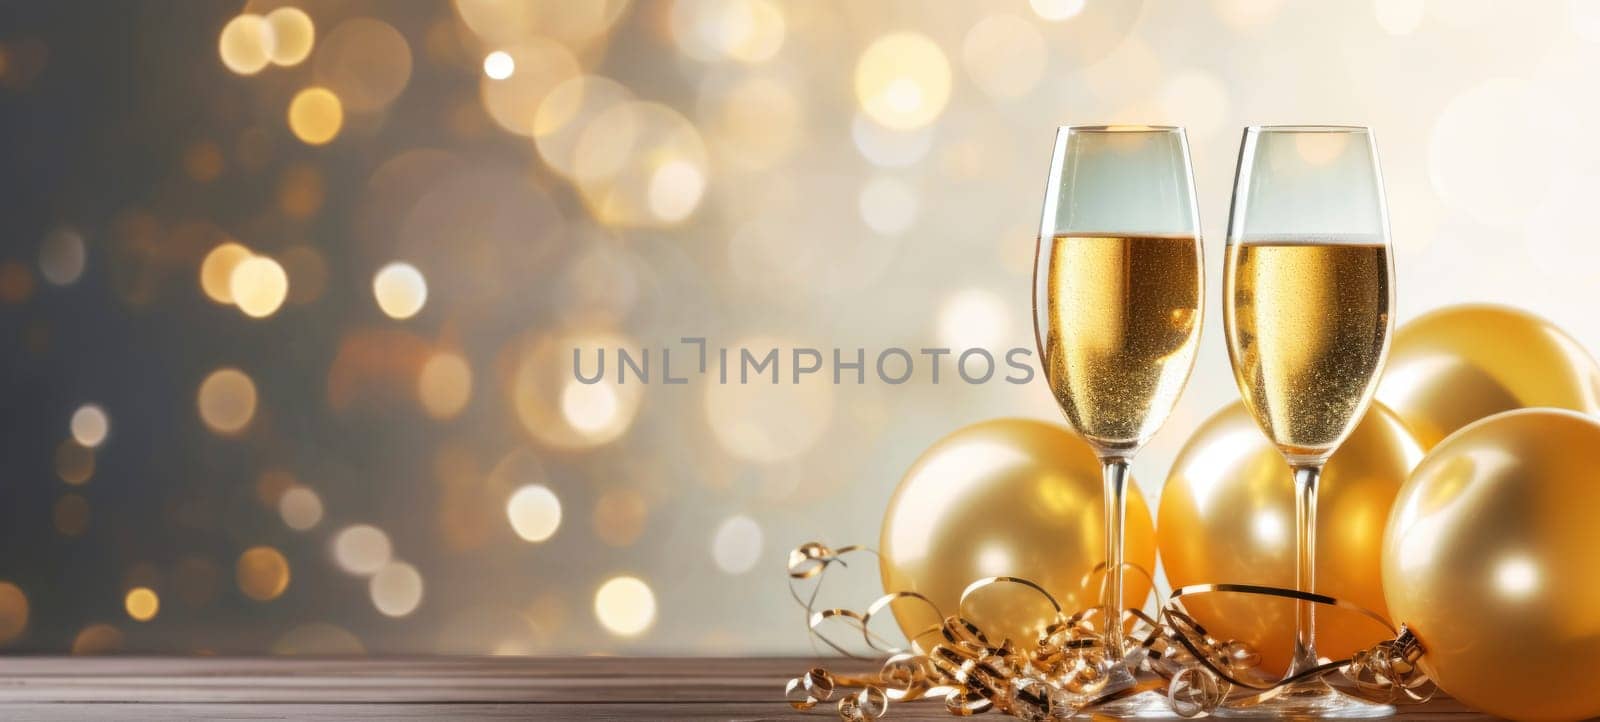 Champagne Toast with Golden Balloons Celebration by andreyz